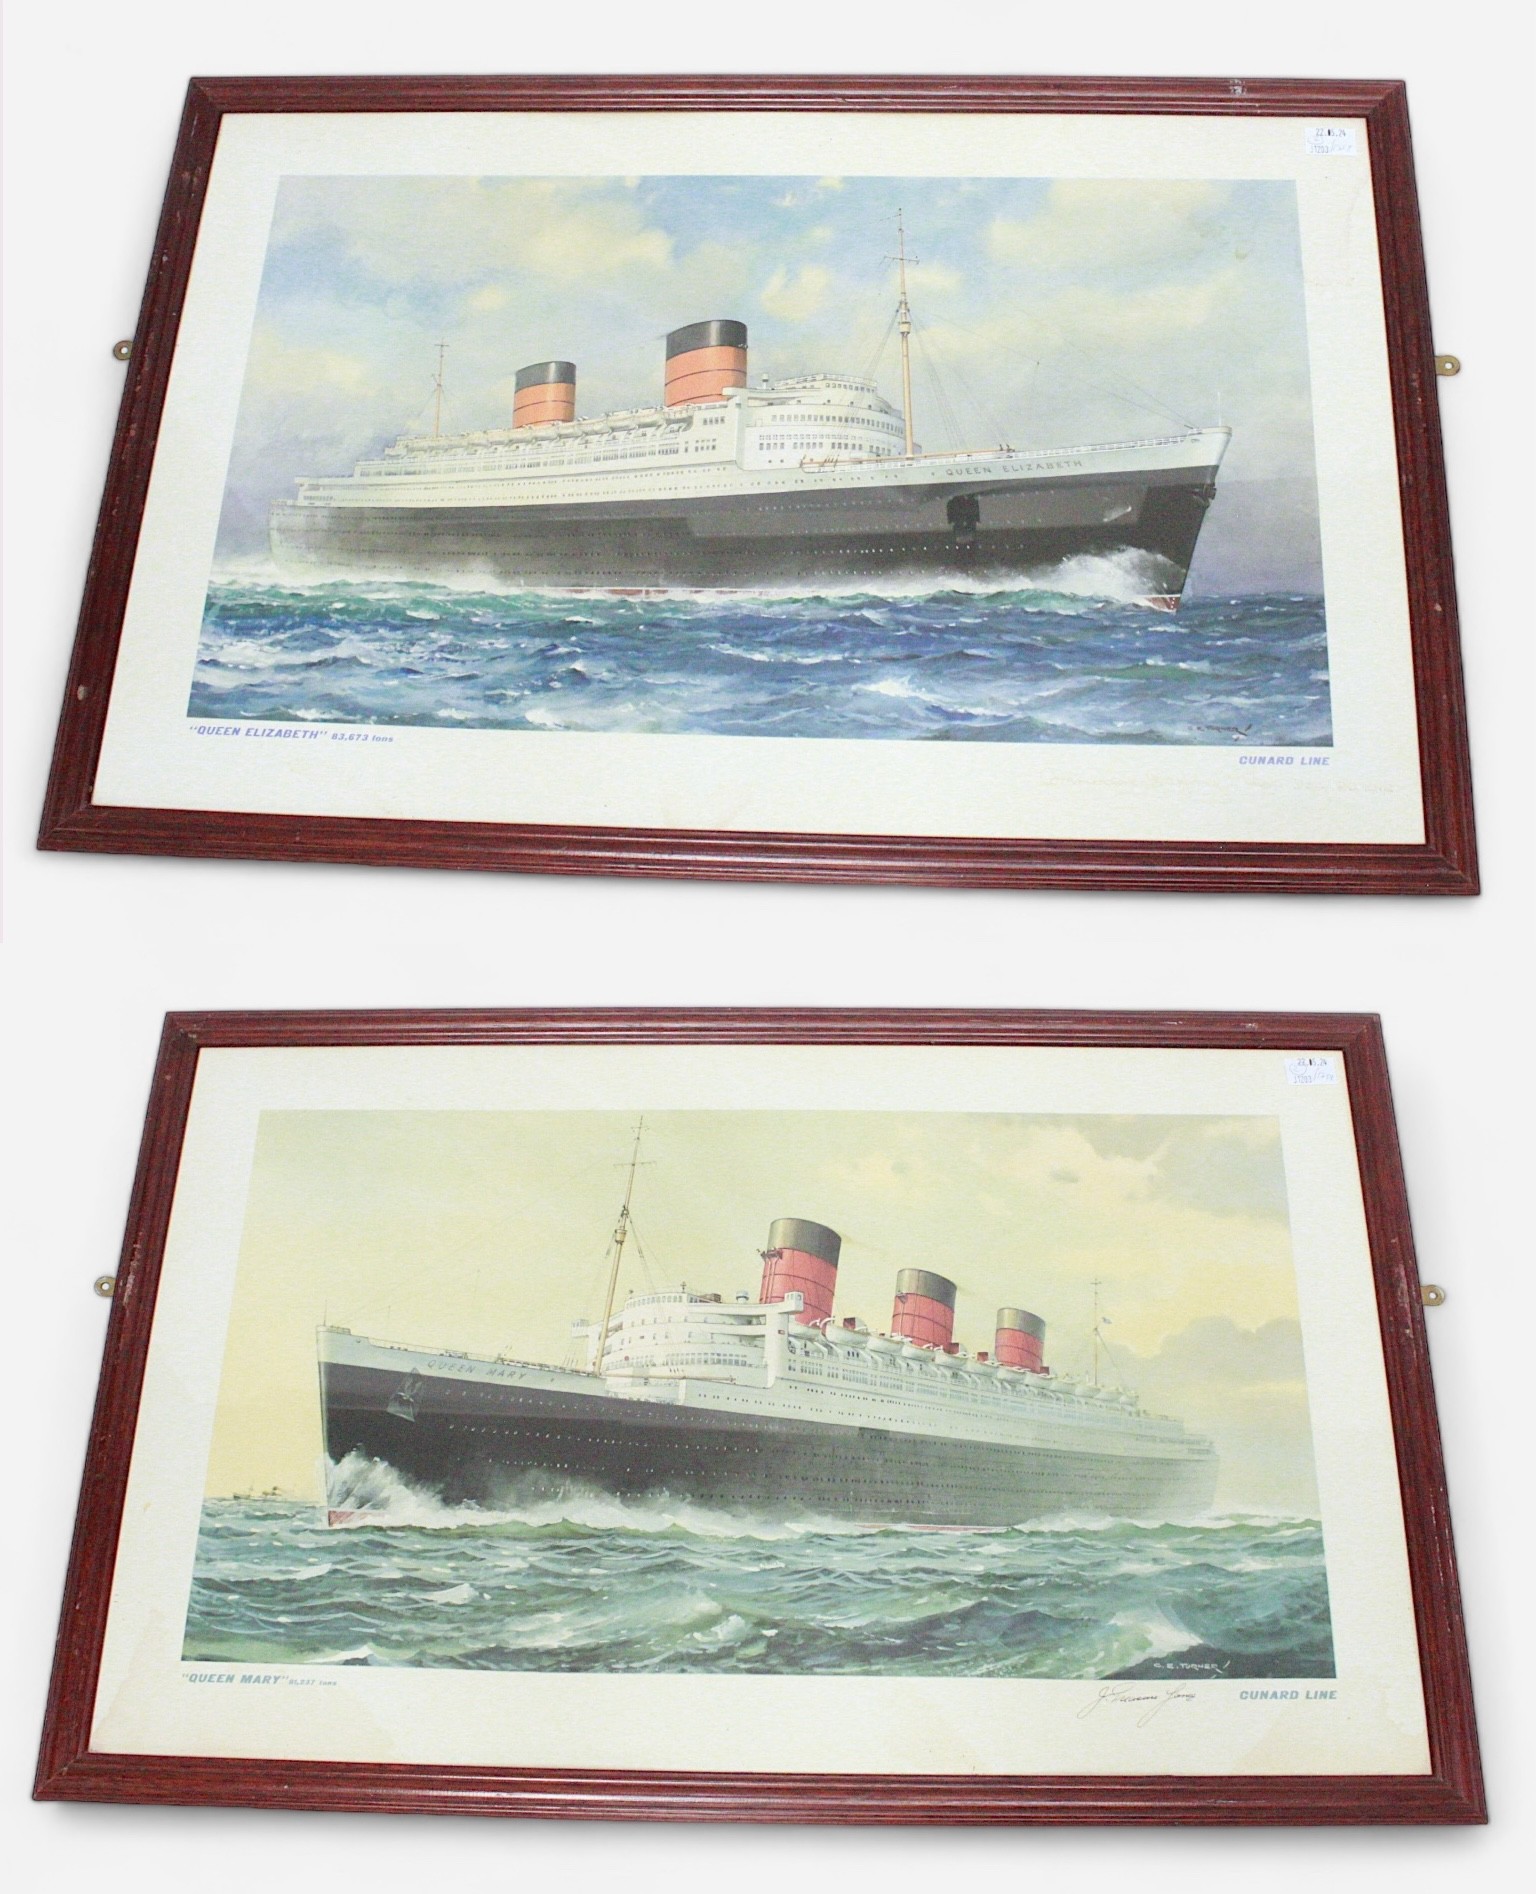 Two Cunard Line advertising posters for ‘Queen Elizabeth’ and ‘Queen Mary’, after Charles E